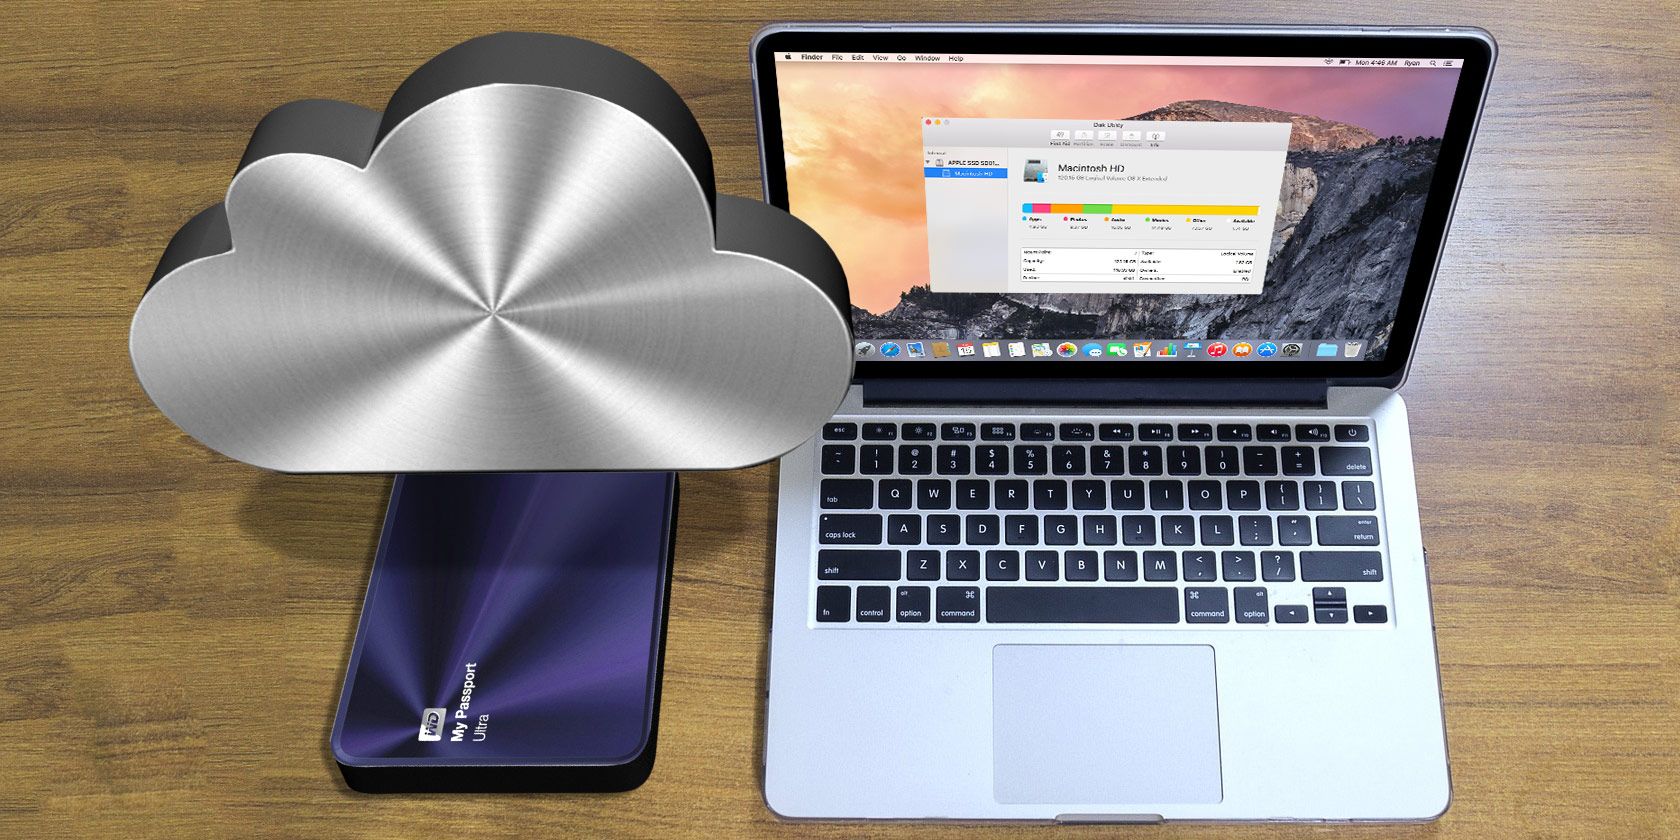 how to free up space on a macbook